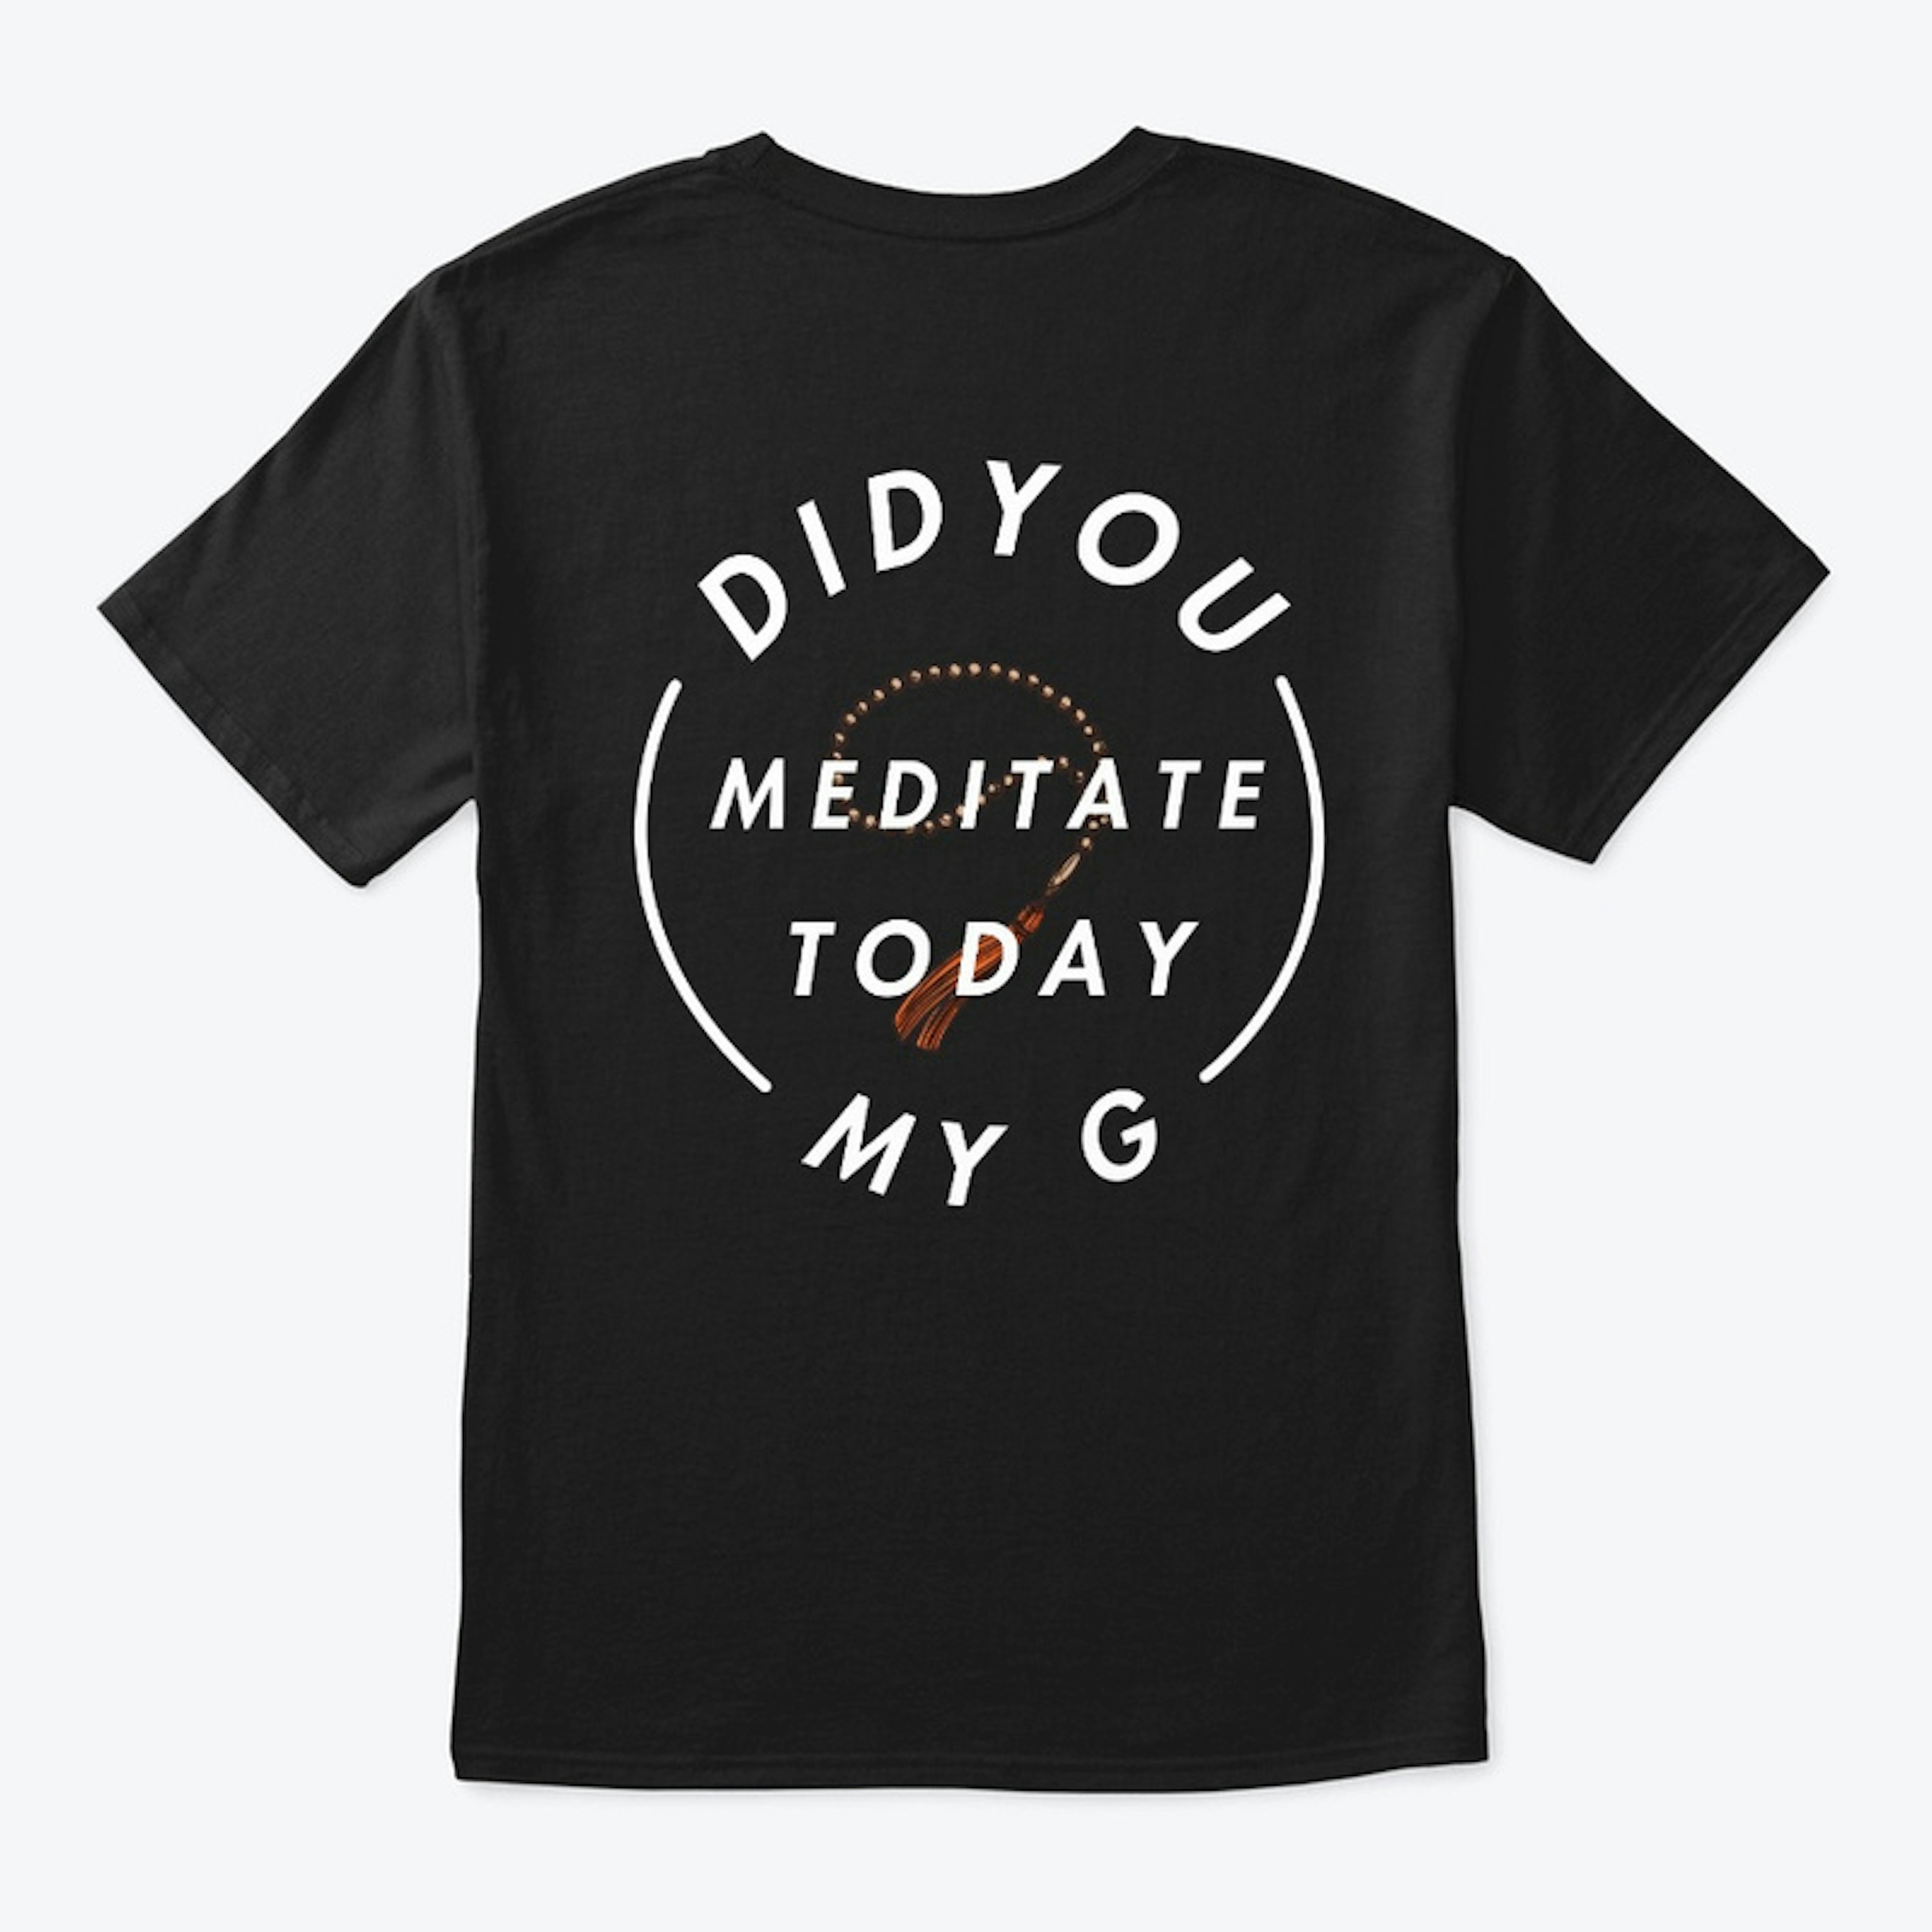 Did You Meditate Today My G?